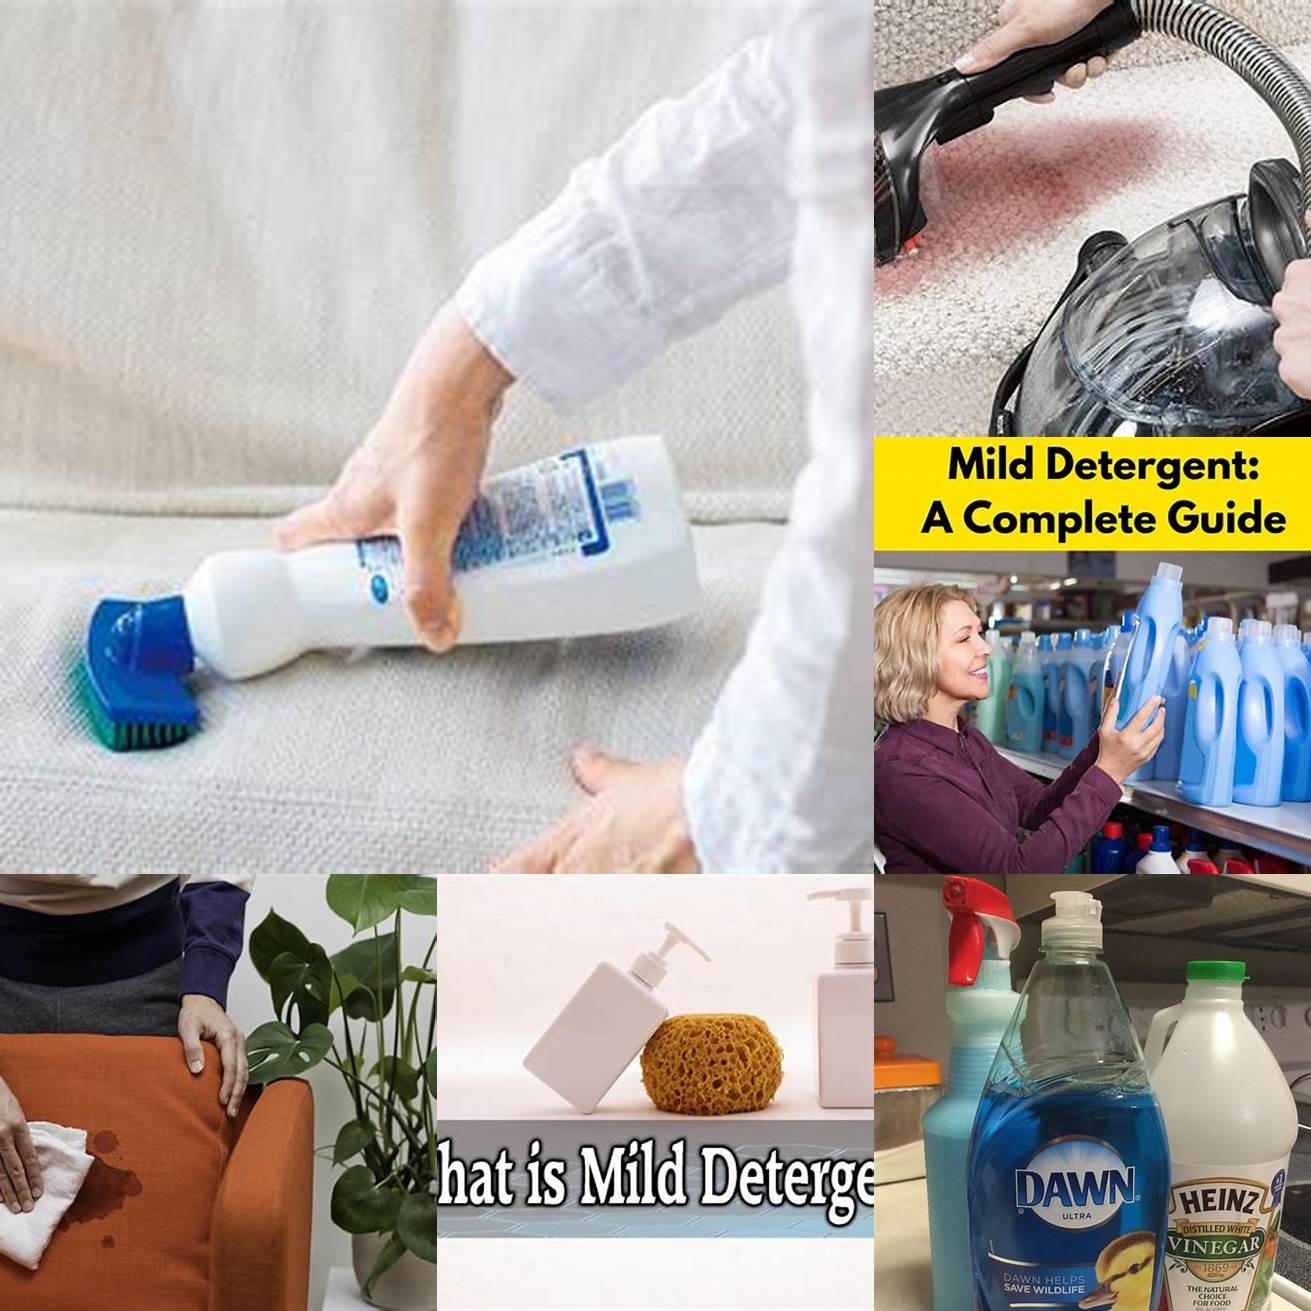 Using a mild detergent and warm water